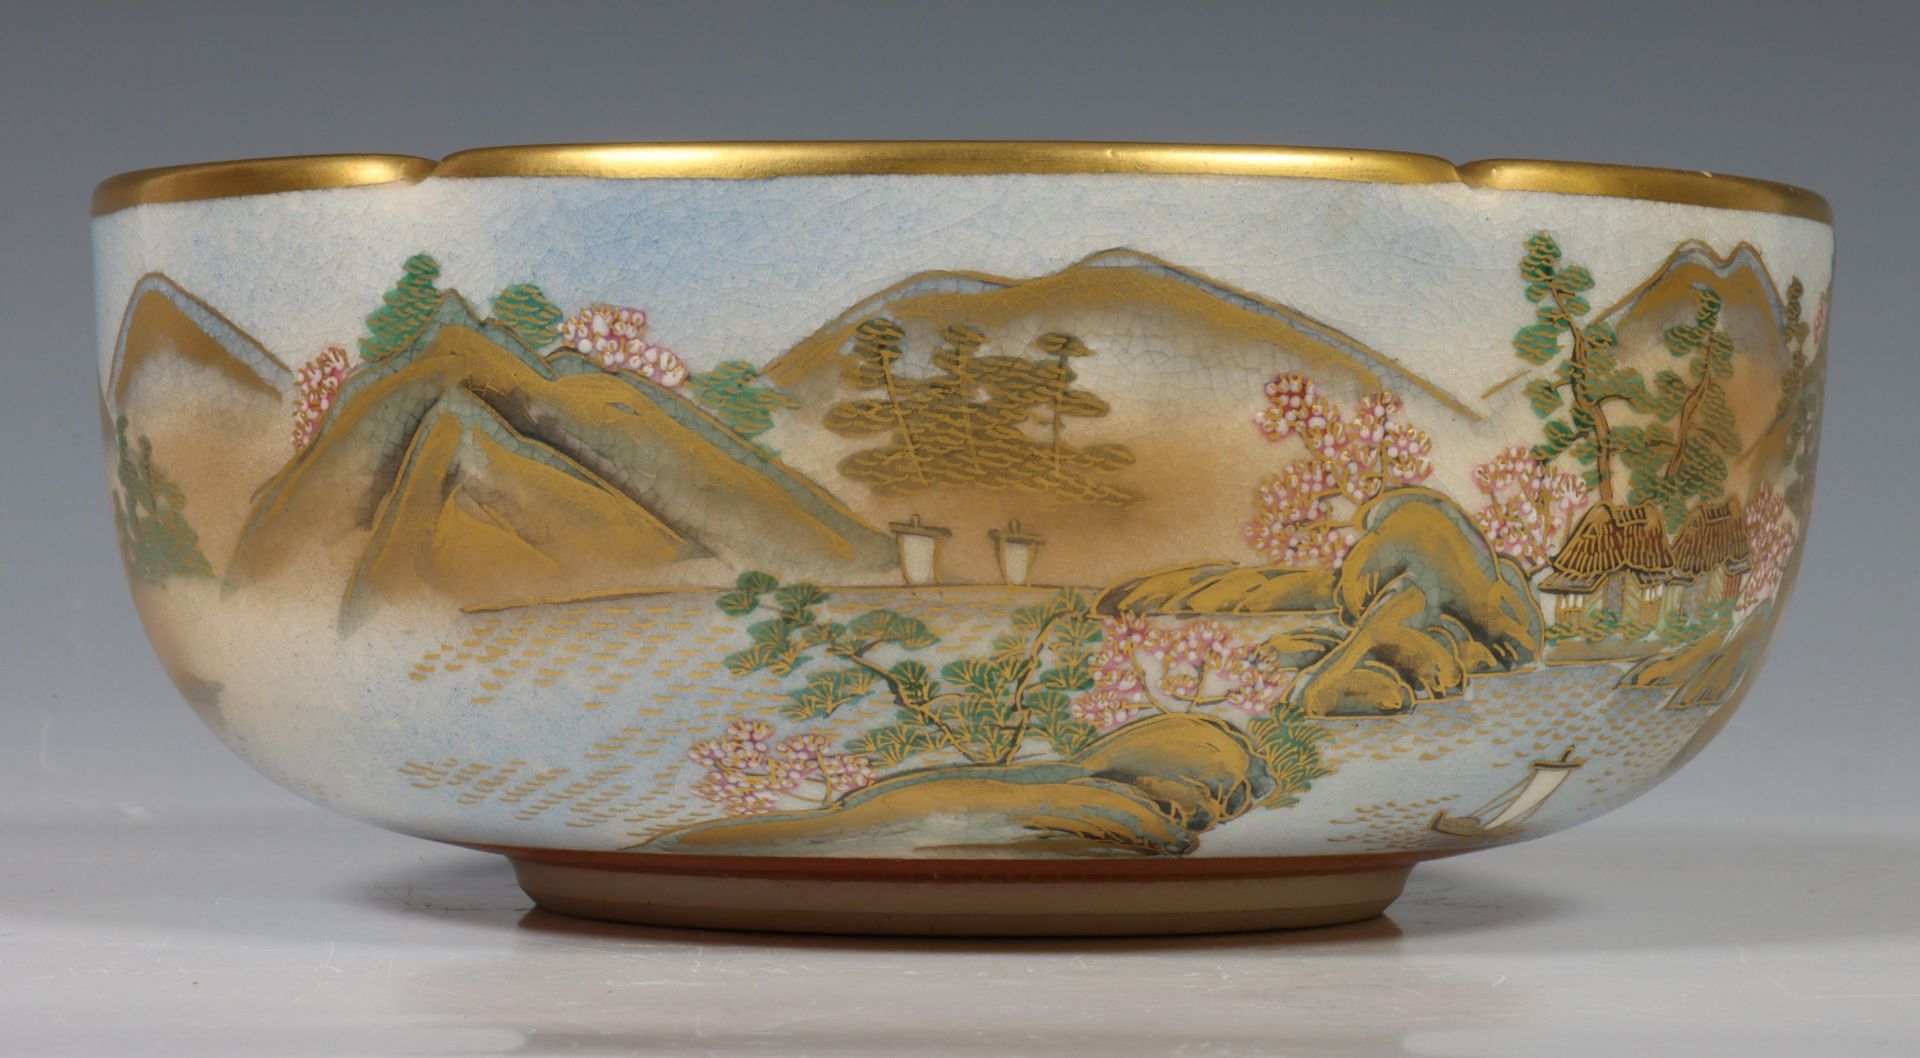 Japan, Satsuma porcelain bowl, 20th century, decorated to the interior with pavilion with mount Fuji - Image 6 of 8